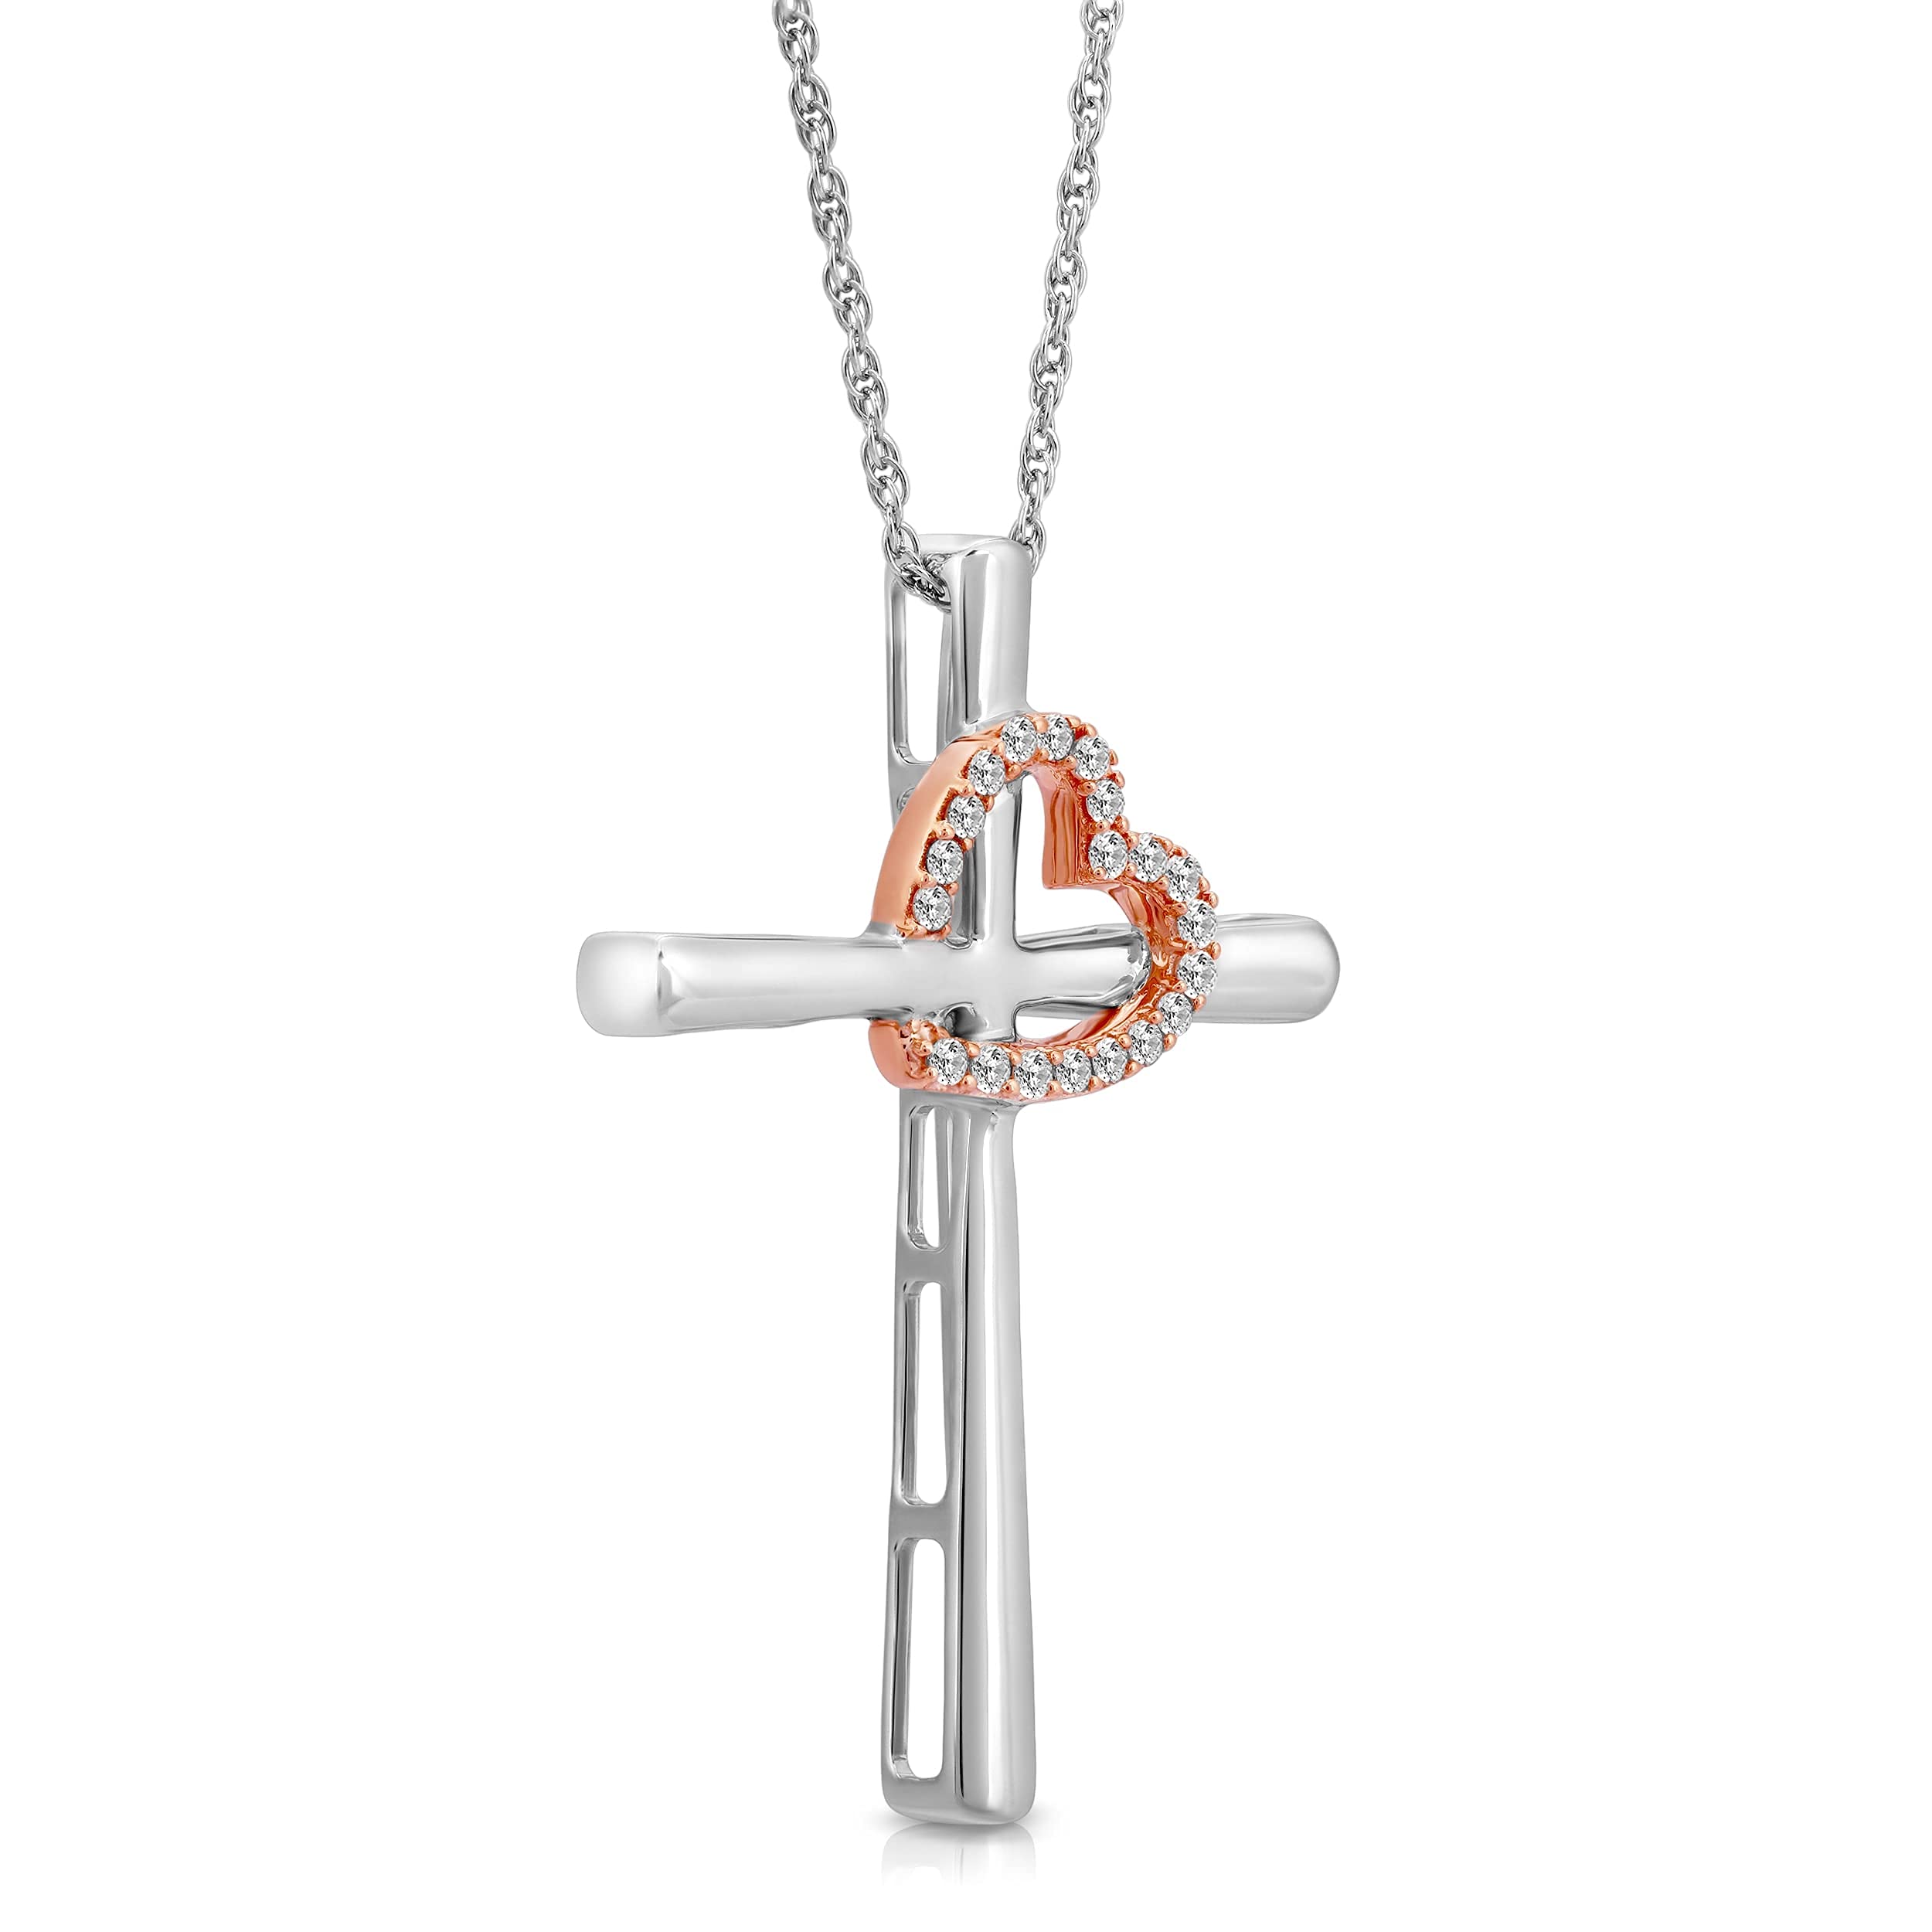 Sterling Silver and Rose Gold Diamond Heart and Cross Pendant Necklace (1/10 cttw, I-J Color, I2-I3 Clarity), 18